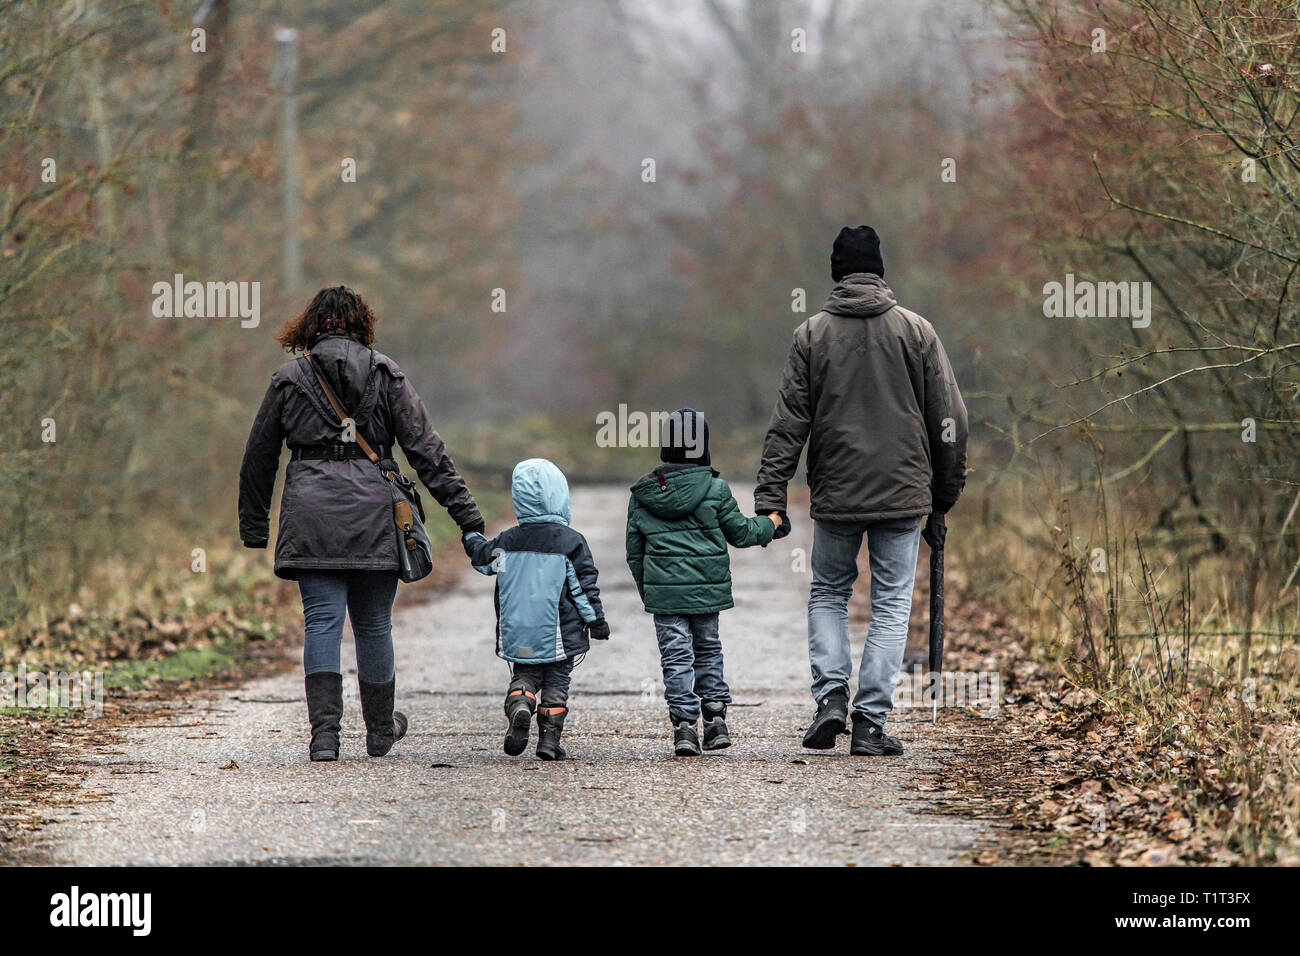 Family, mother, father, two children on a walk, Stock Photo